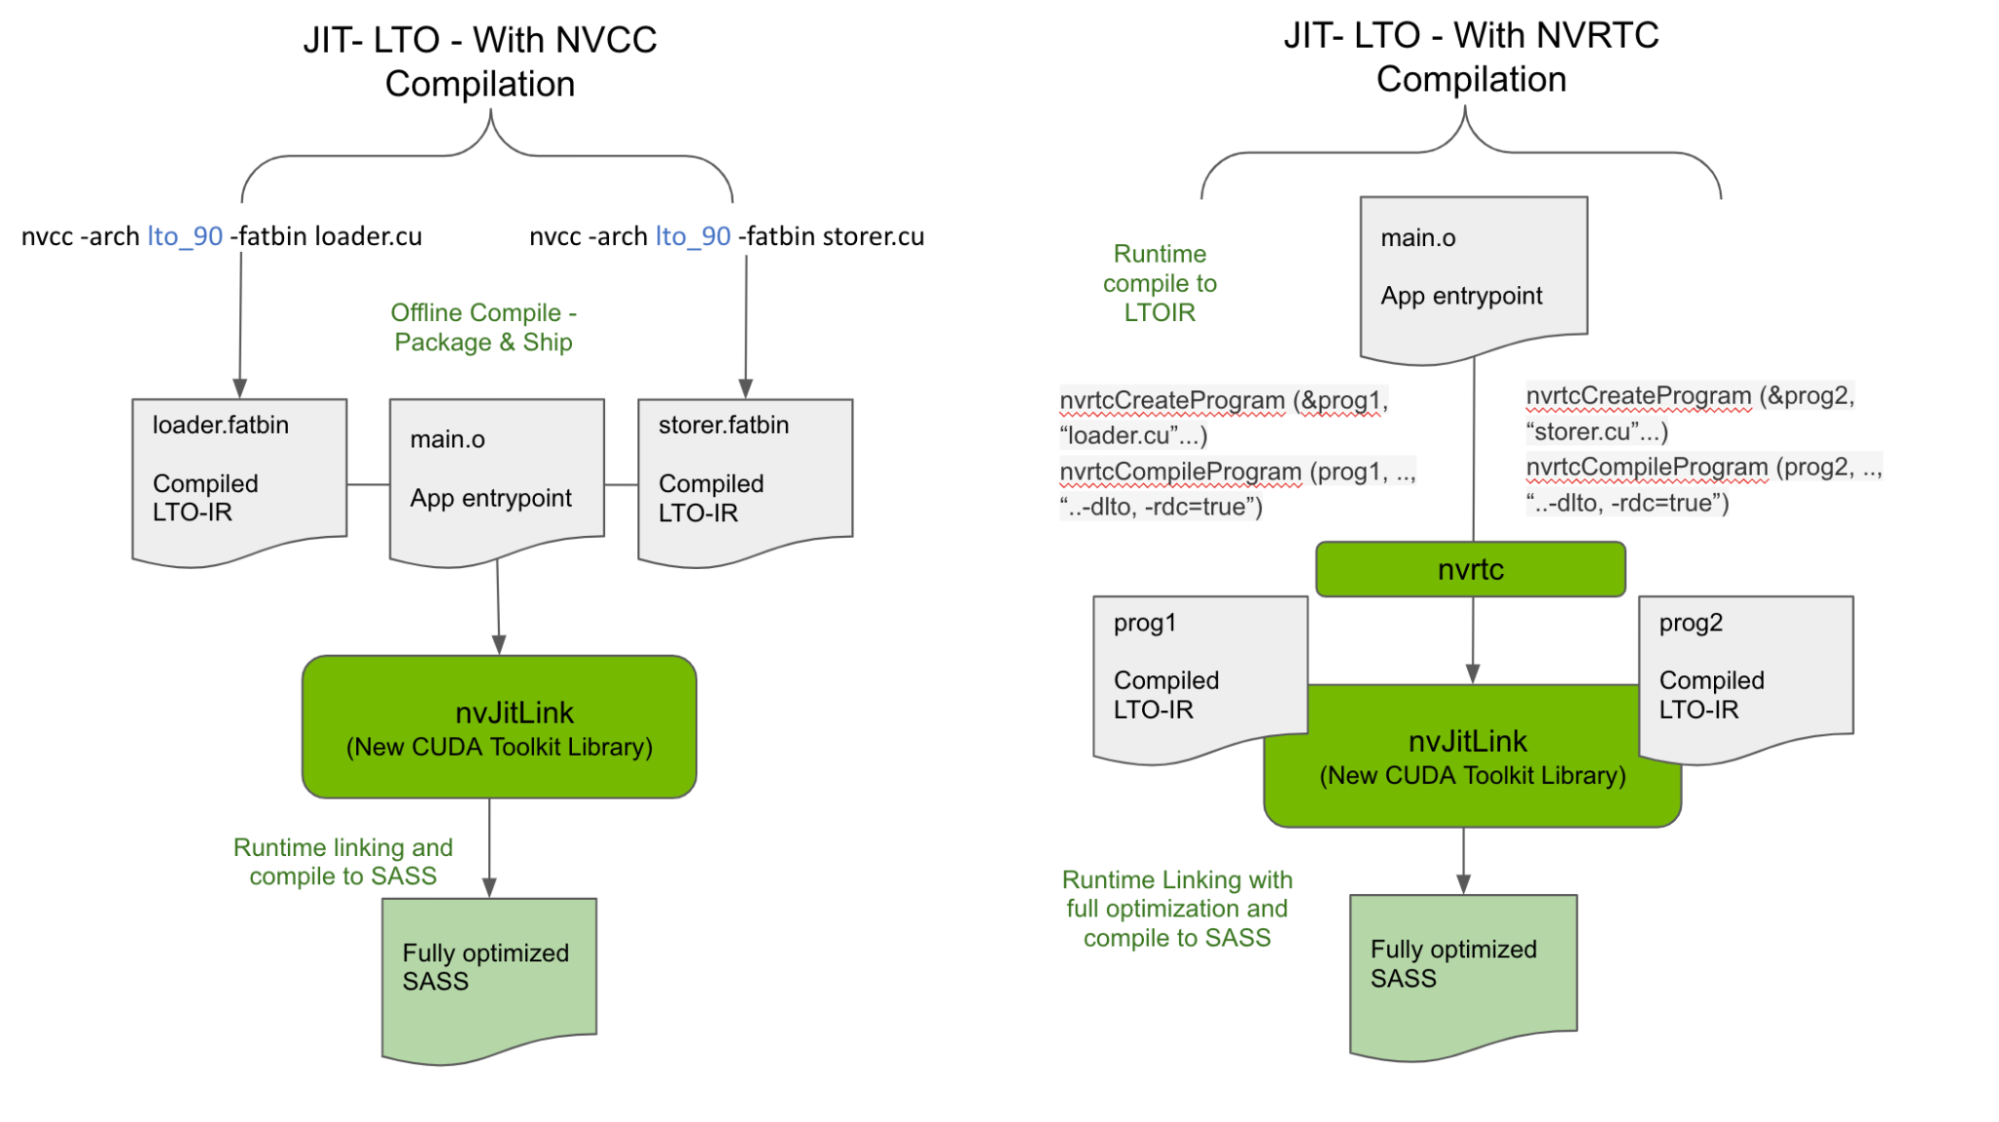 Graphic showing JIT LTO workflow comparison when LTO-IR is generated by NVCC versus NVRTC. Left side shows NVCC generates LTO-IR and nvJitLink library performs JIT Linking. Right side shows NVRTC generates LTO-IR and nvJitLink can be invoked to perform JIT linking.